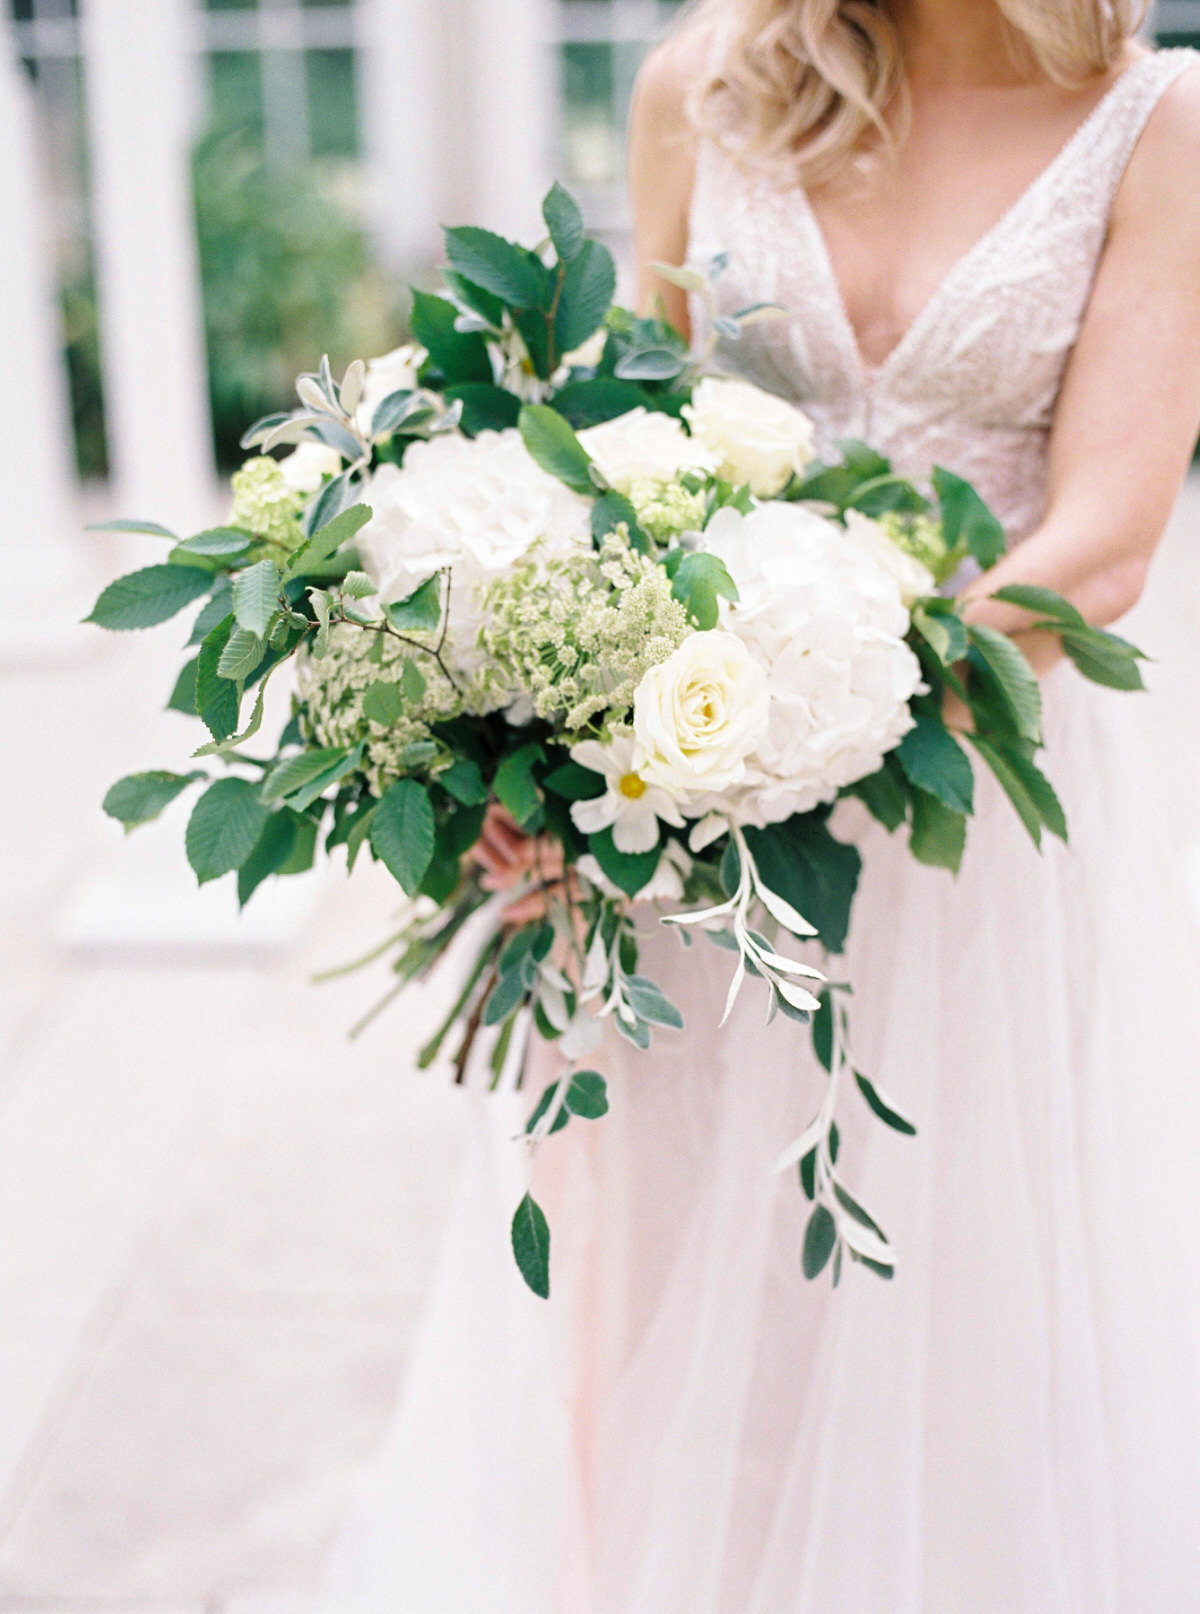 Large white and green luxury wedding bouquet 